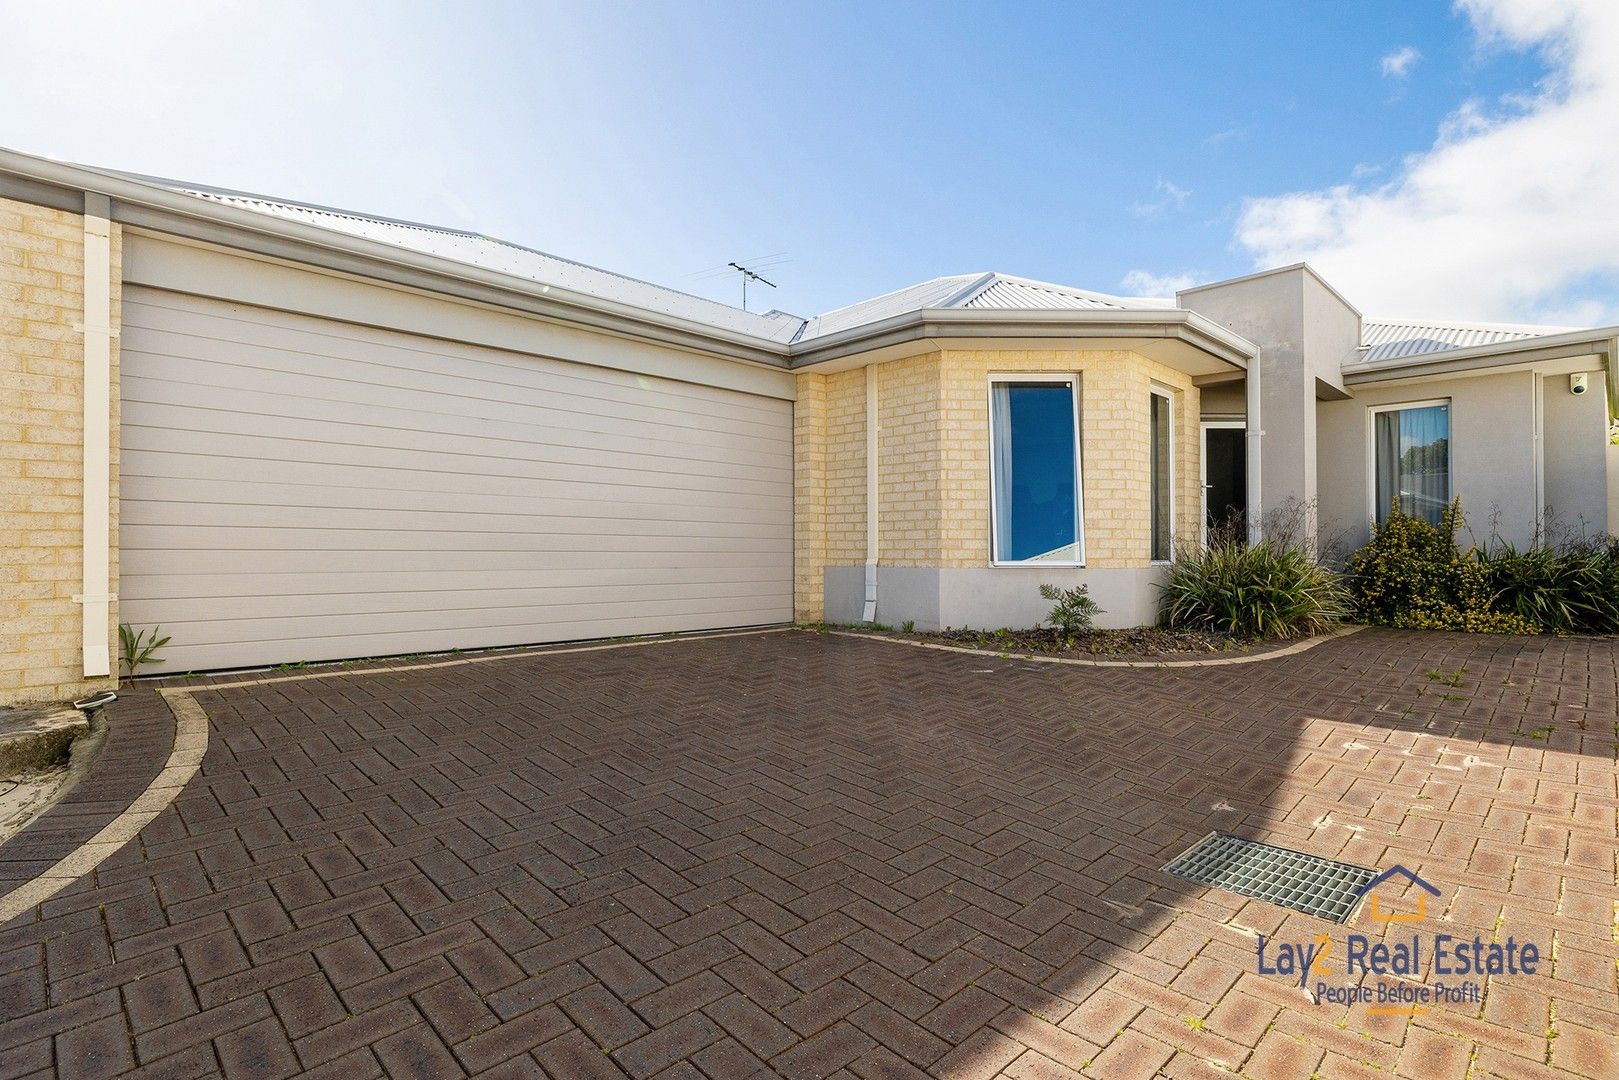 3 bedrooms House in 5B Jacqueline Street BAYSWATER WA, 6053